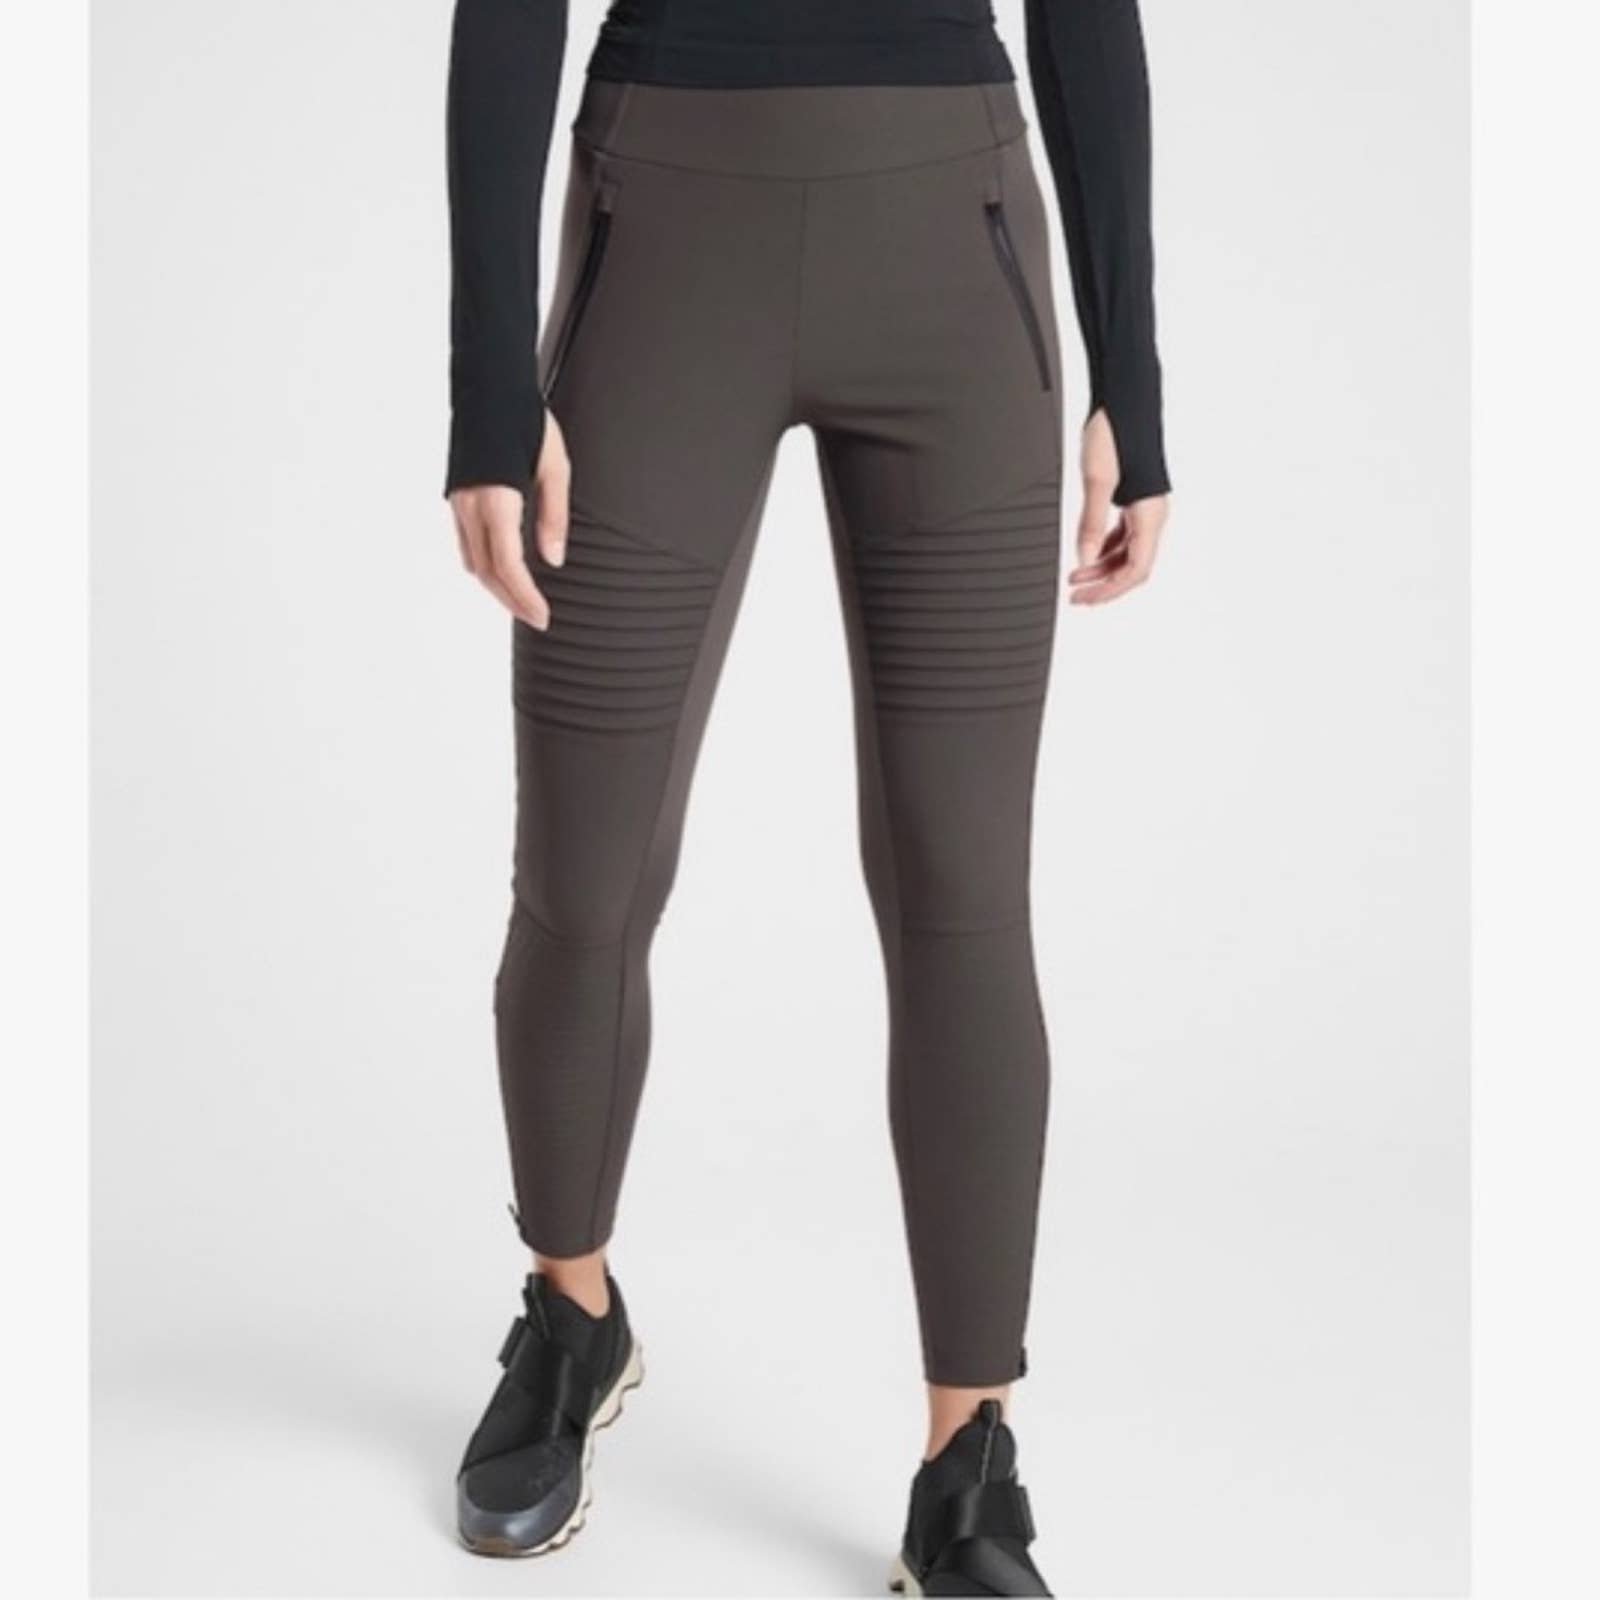 cheapest place to buy  Athleta Size 2 Headlands Hybrid Moto Tight l2ou8atzo just for you